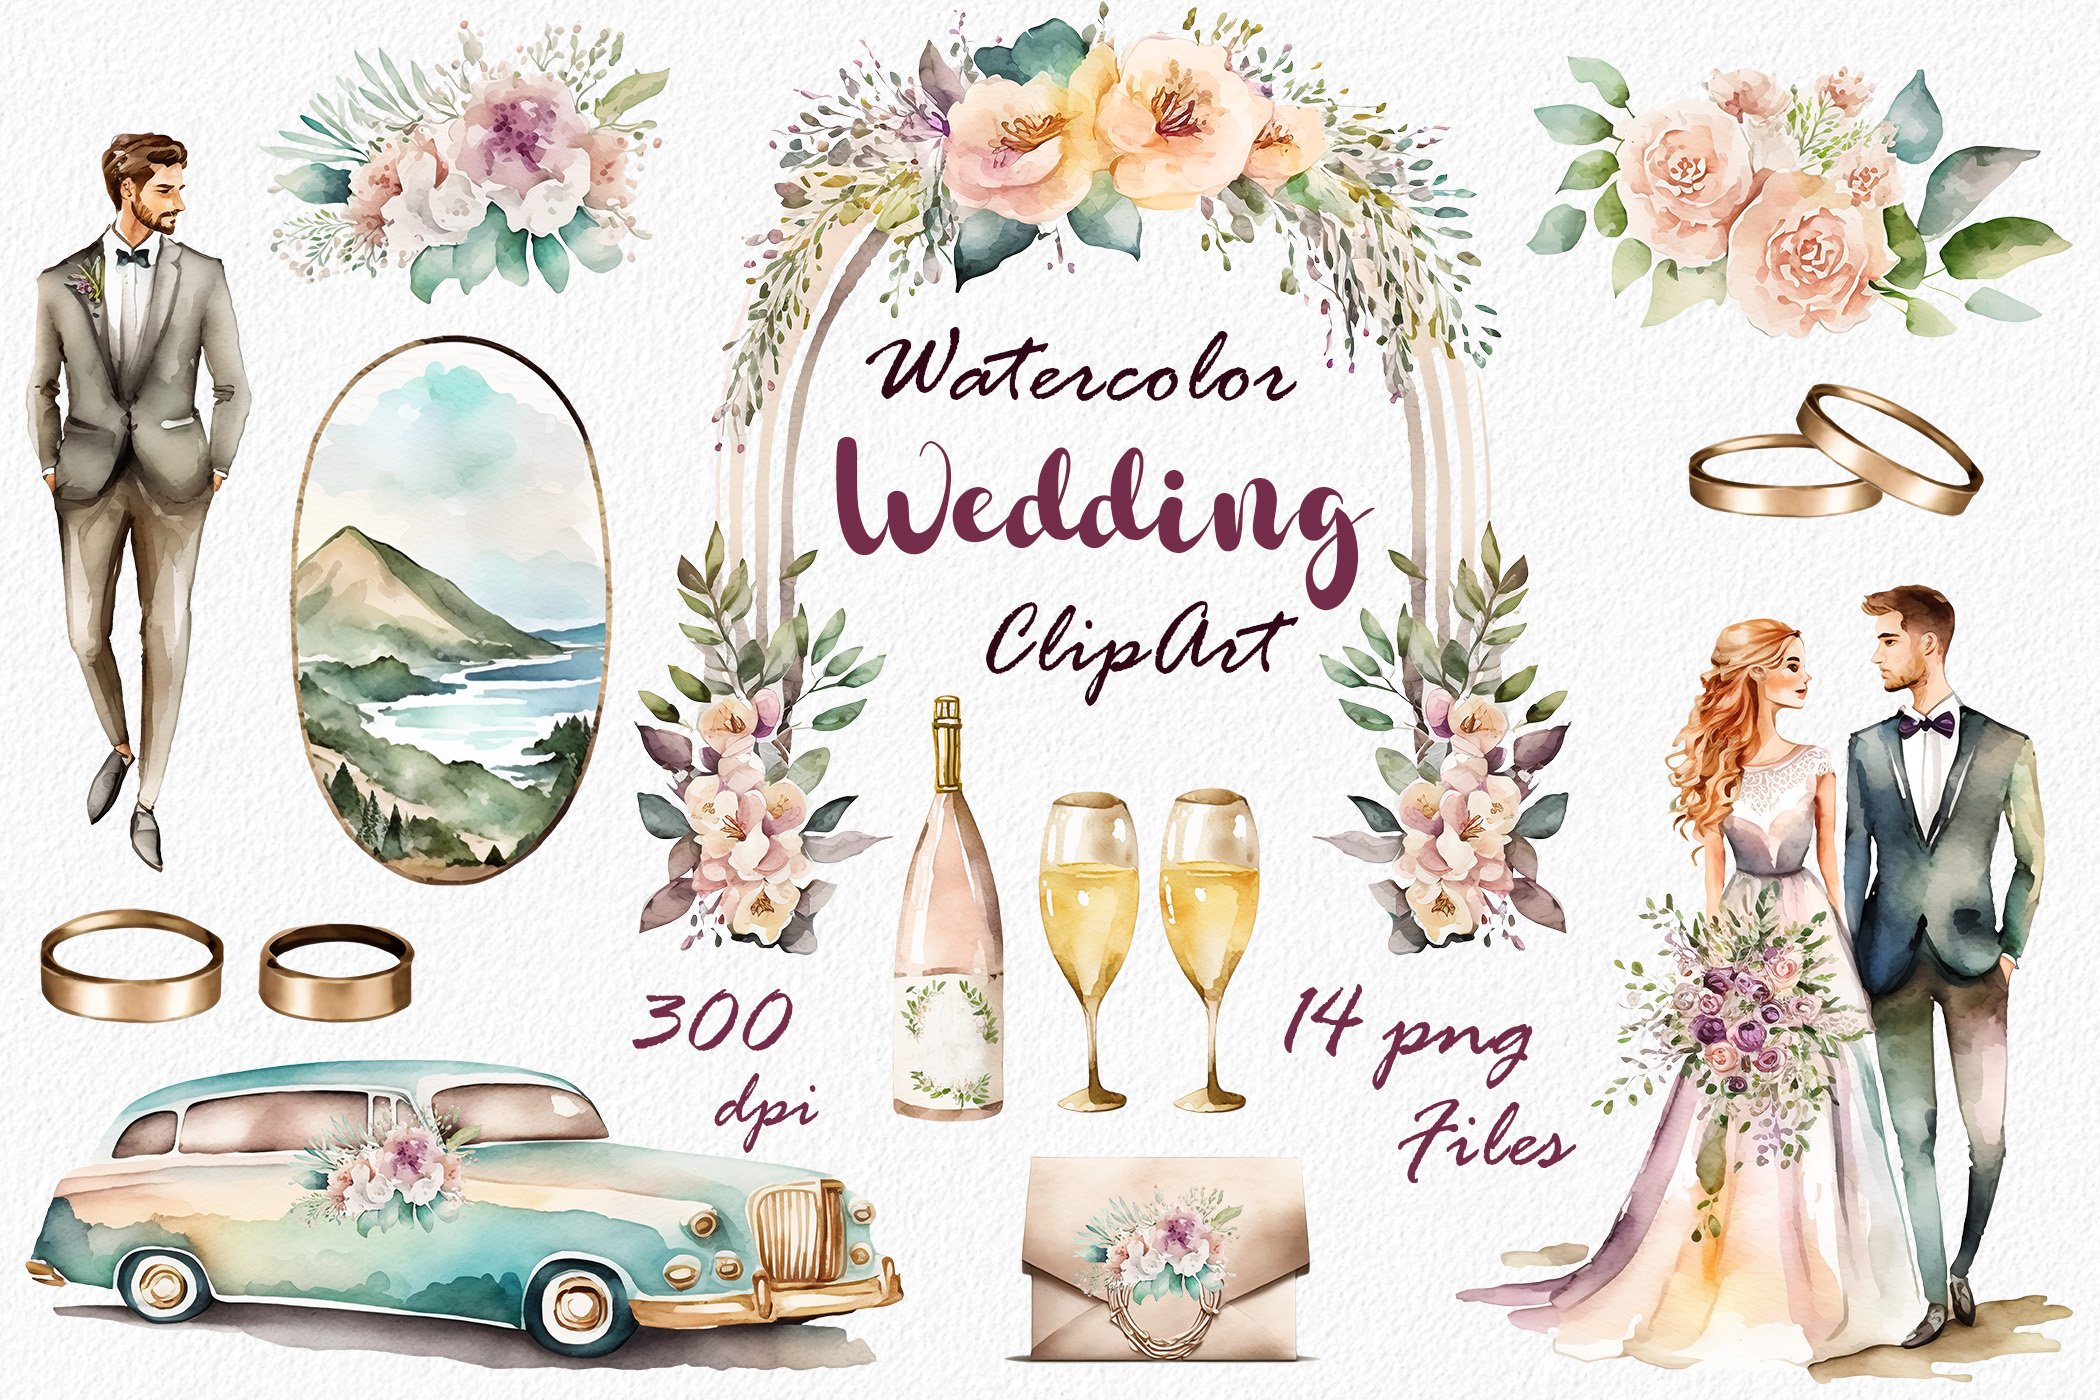 Watercolor Wedding Clipart cover image.